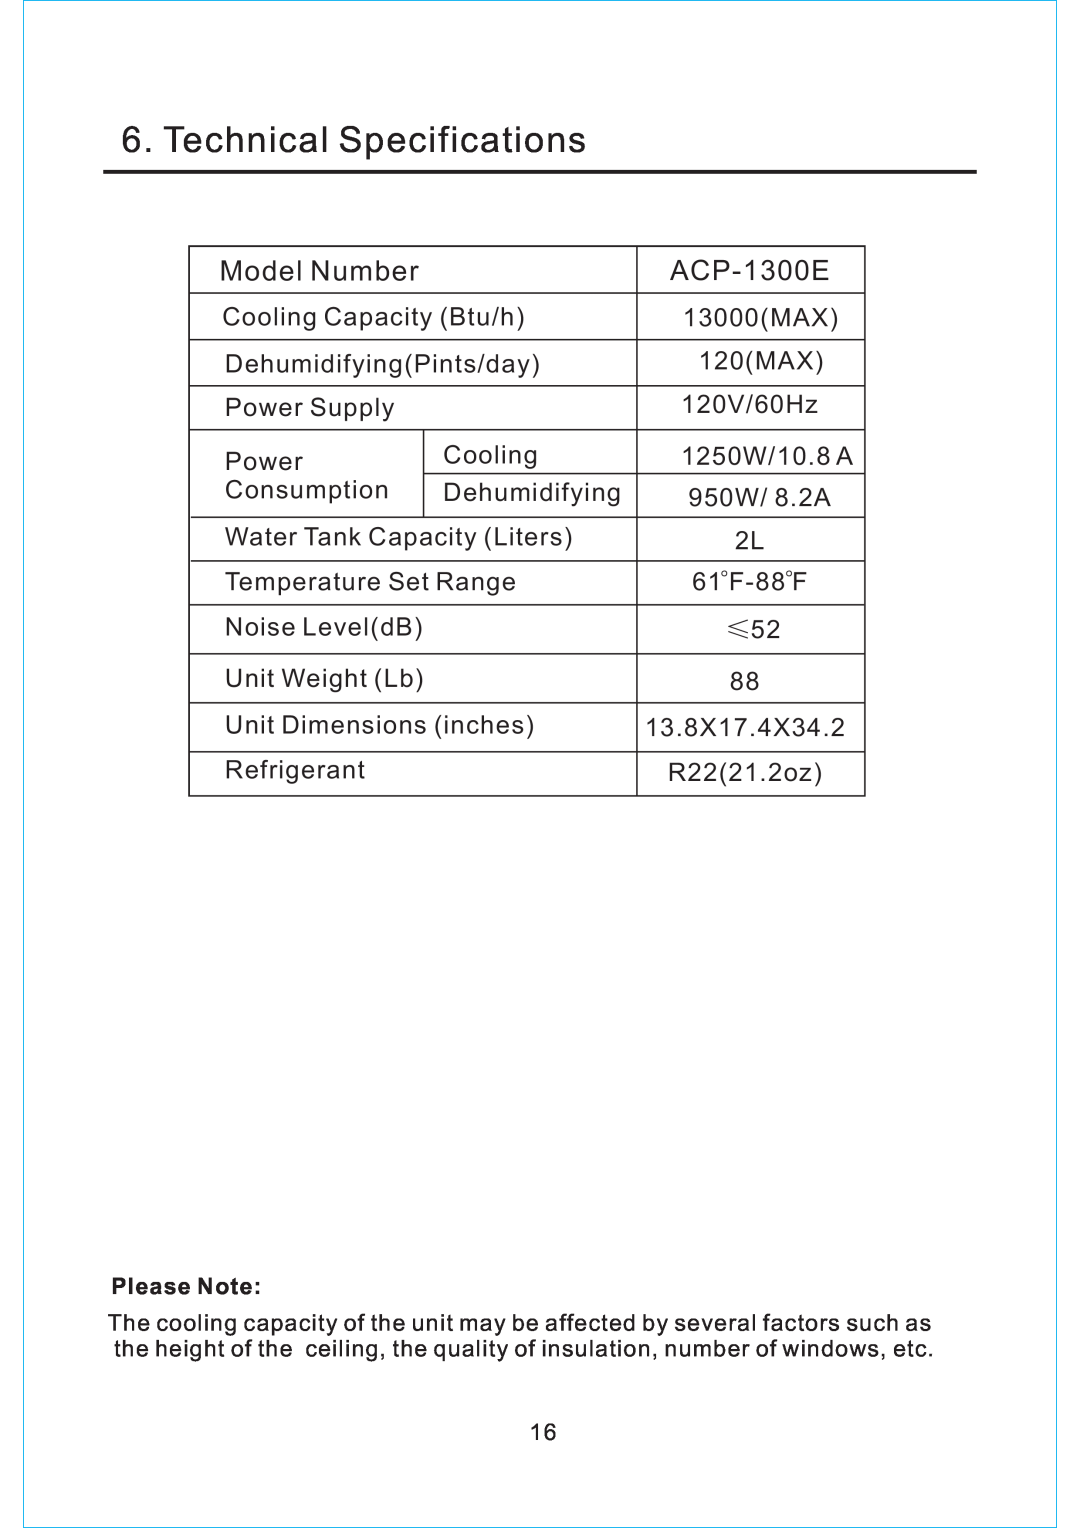 NewAir ACP-1300E owner manual Technical Specifications, Model Number 